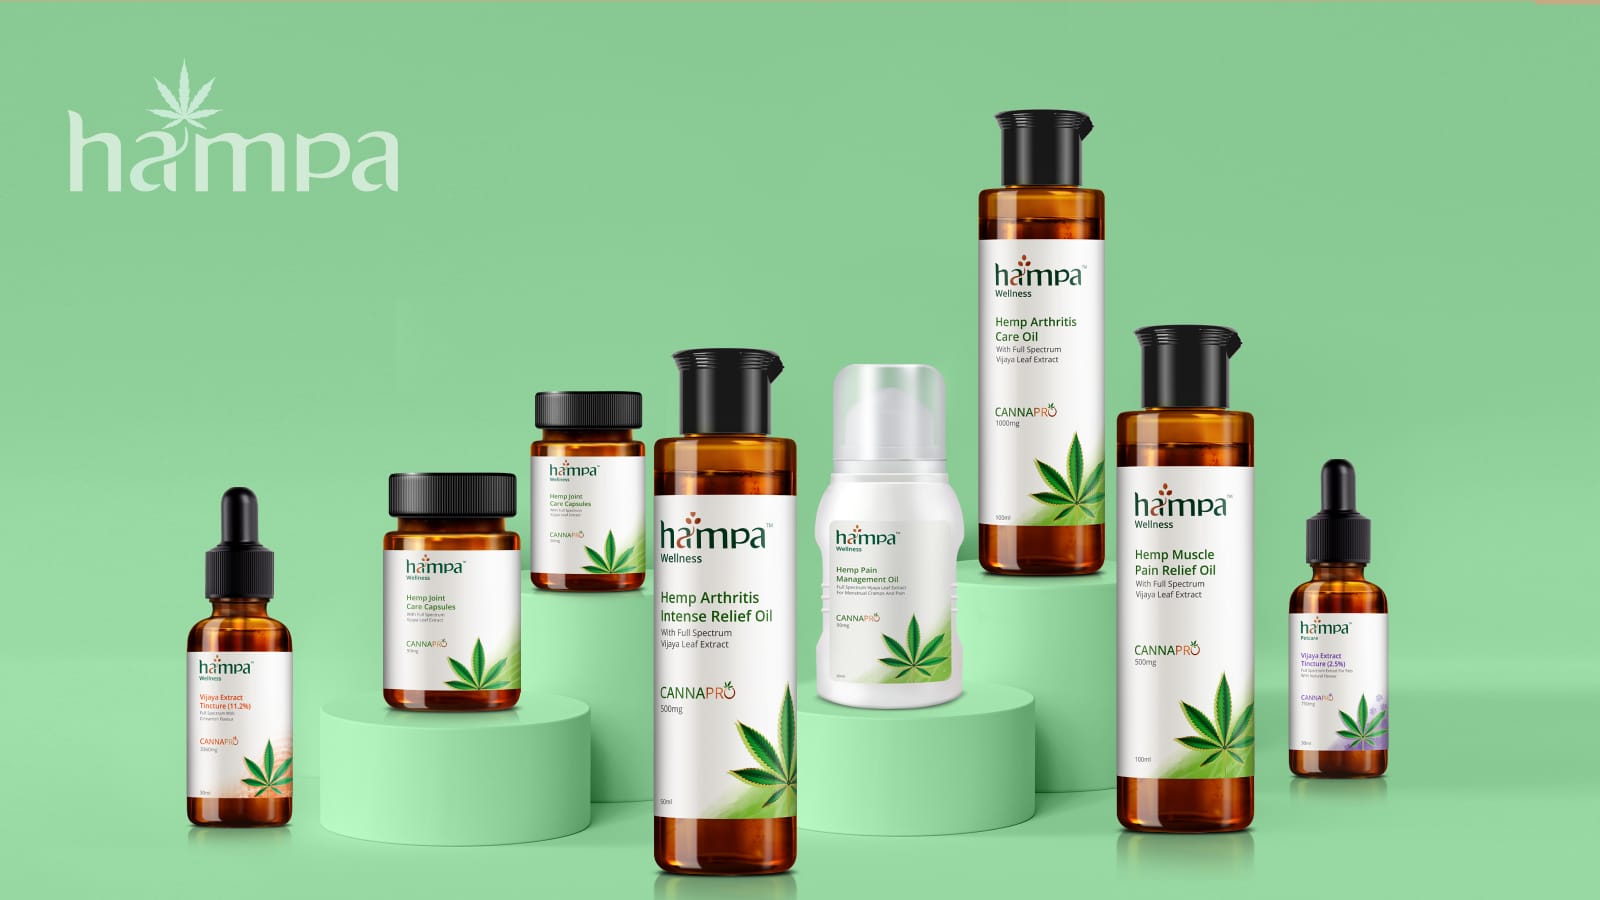 Elevate Your Well-Being with HAMPA’s Hemp-Based Wellness Solutions